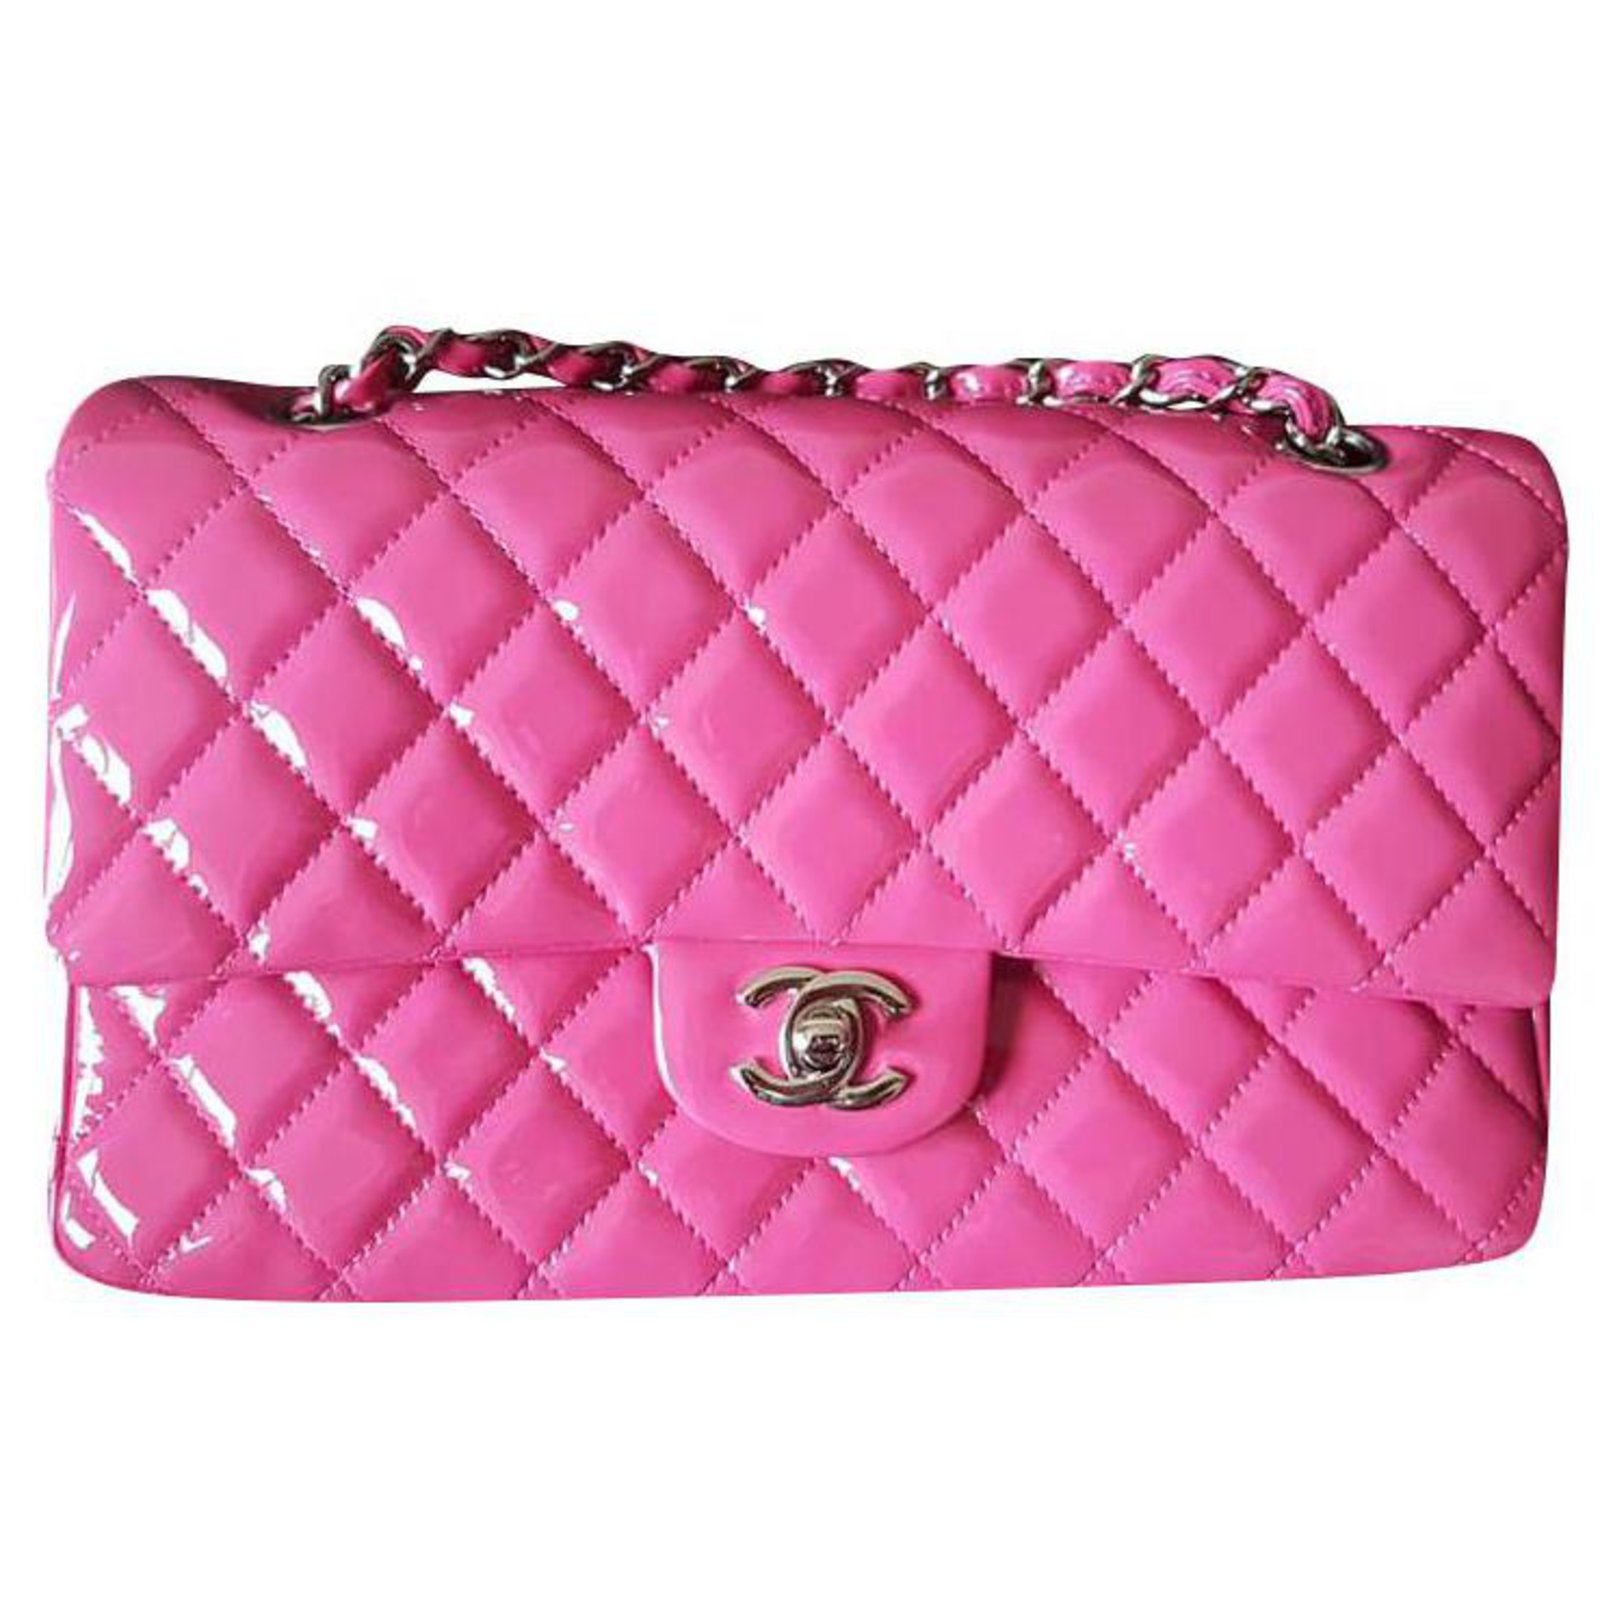 Chanel Timeless Classic Medium/Large Flap Pink Patent leather ref